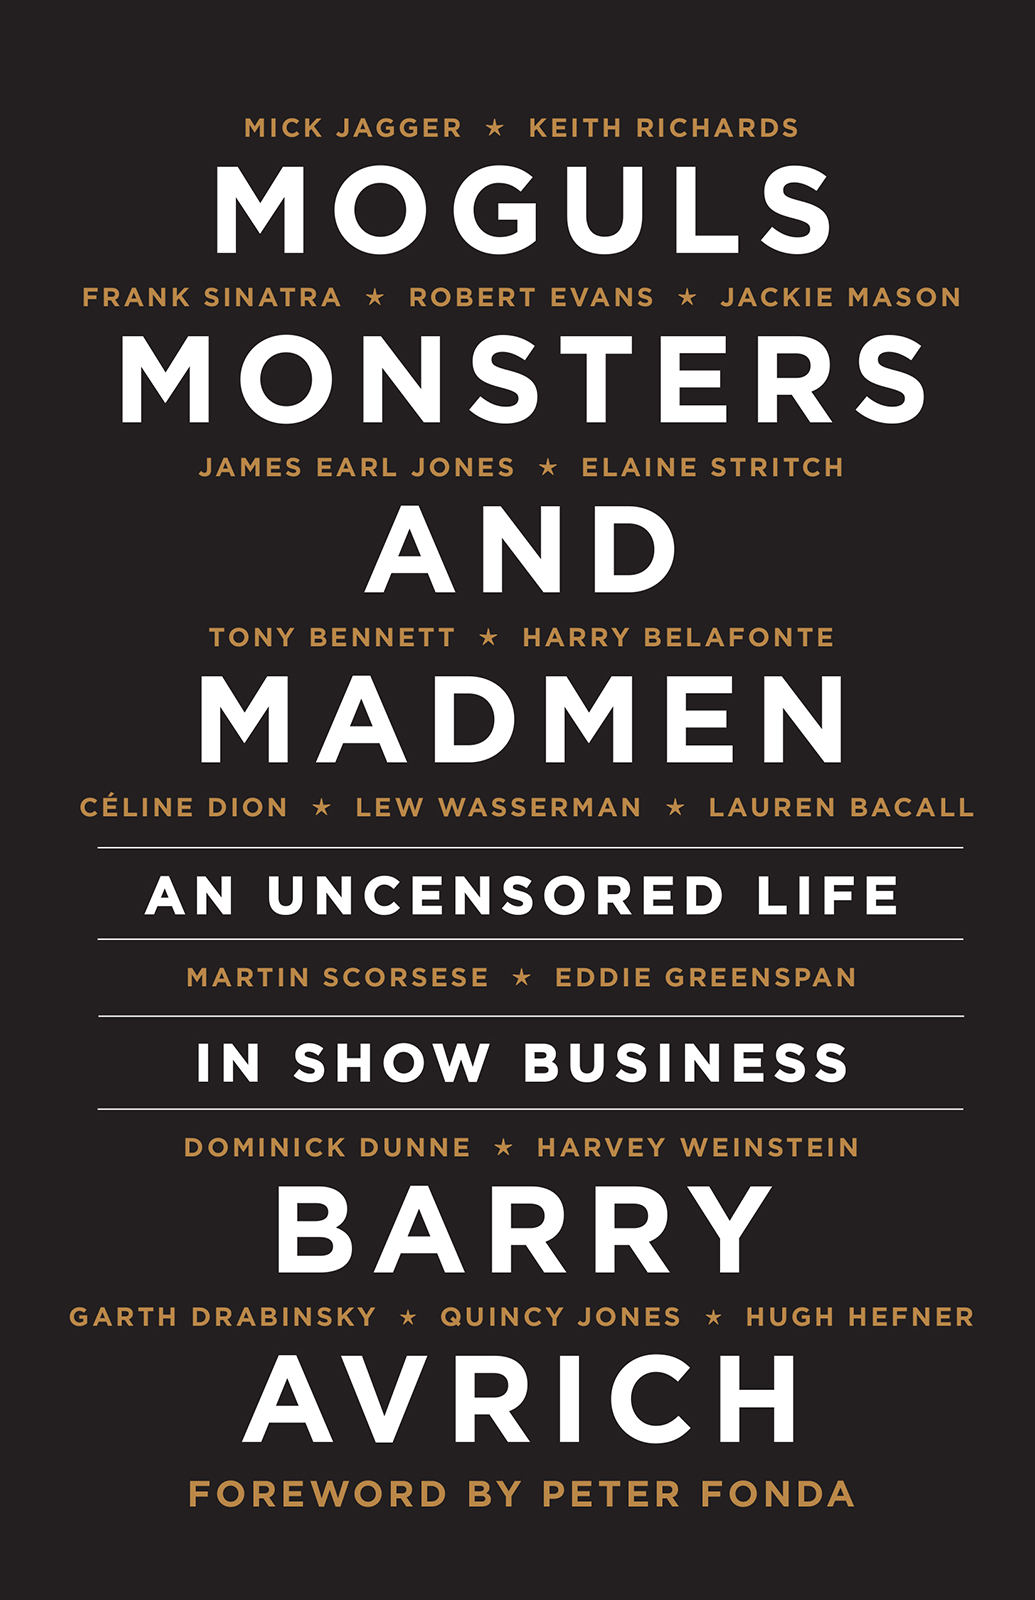 MOGULS MONSTERS AND MADMEN AN UNCENSORED LIFE IN SHOW BUSINESS BARRY AVRICH - photo 1